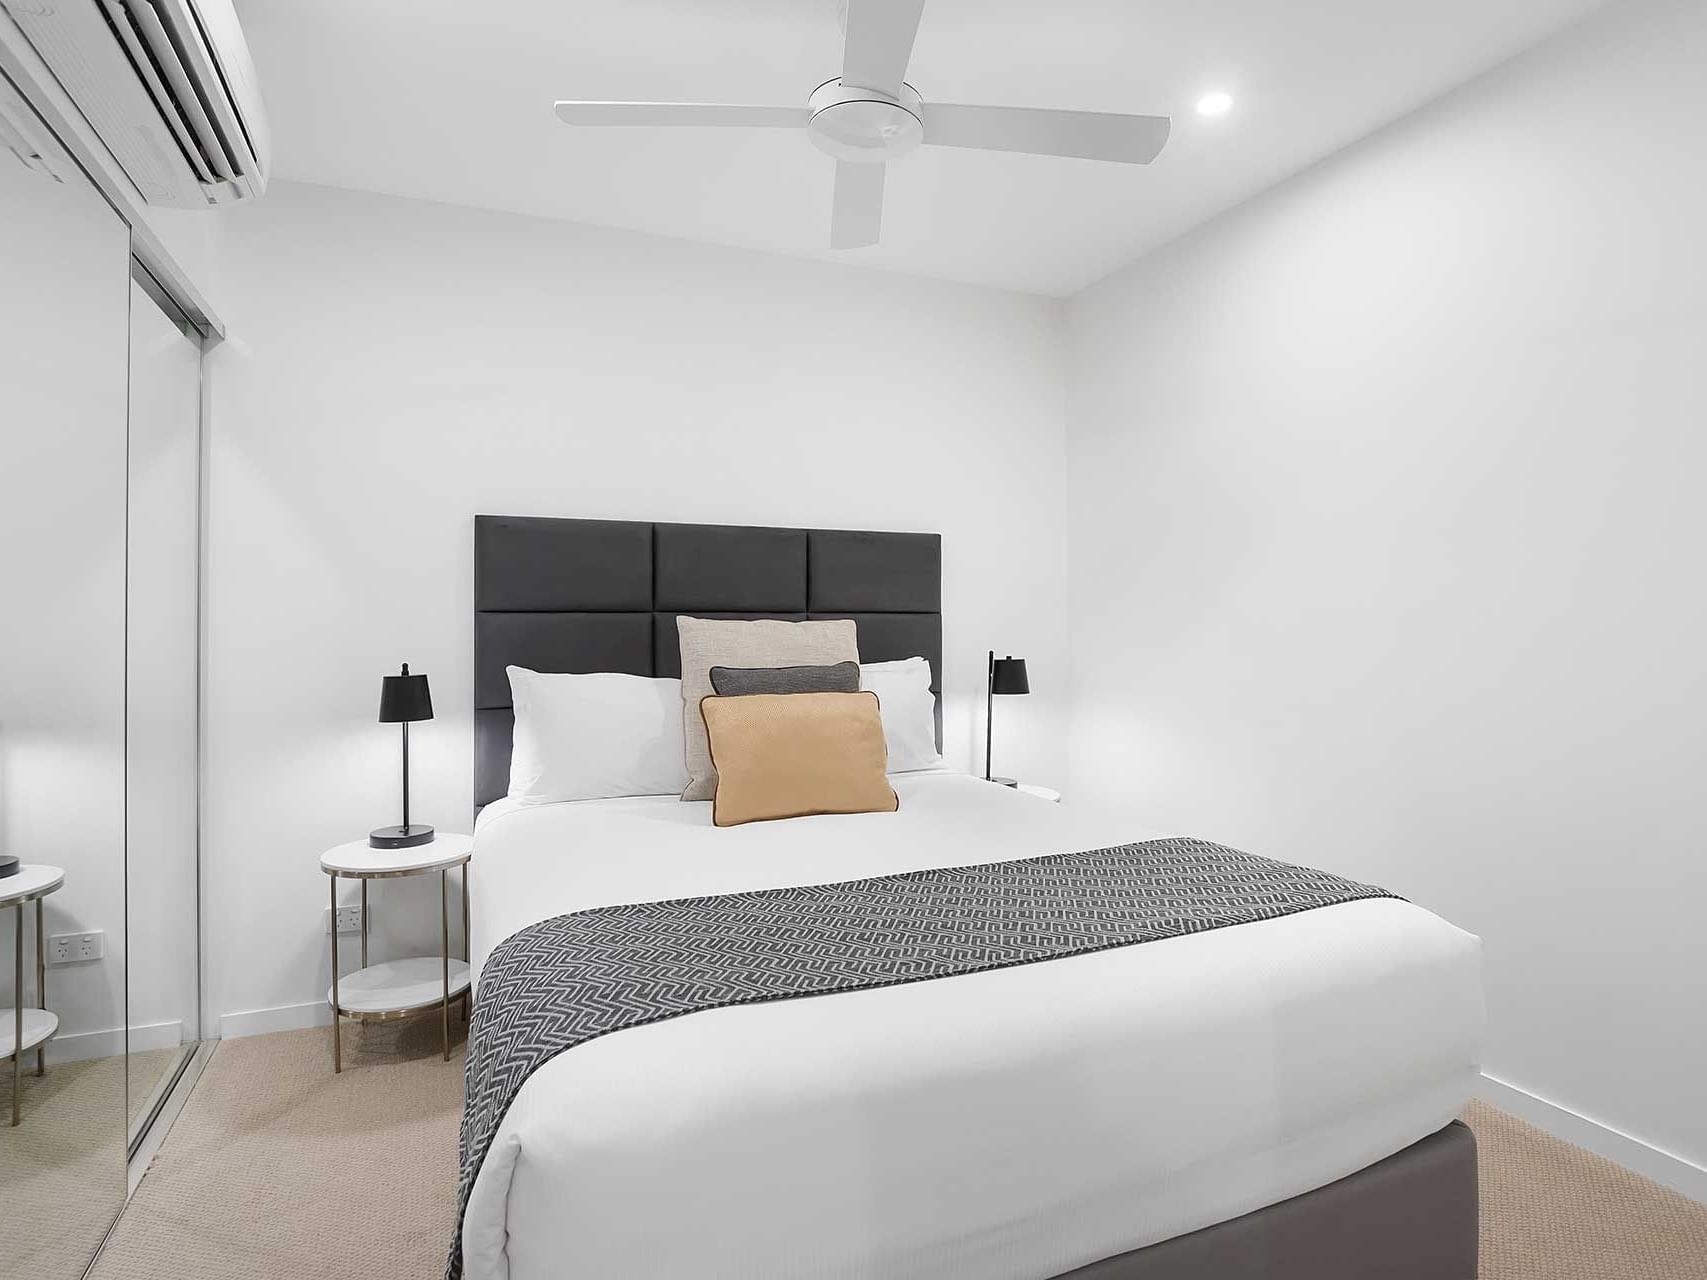 King bed in Two Bedroom Two Bathroom Apartment at Alcyone Hotel Residences which supplies Accommodation in Brisbane CBD